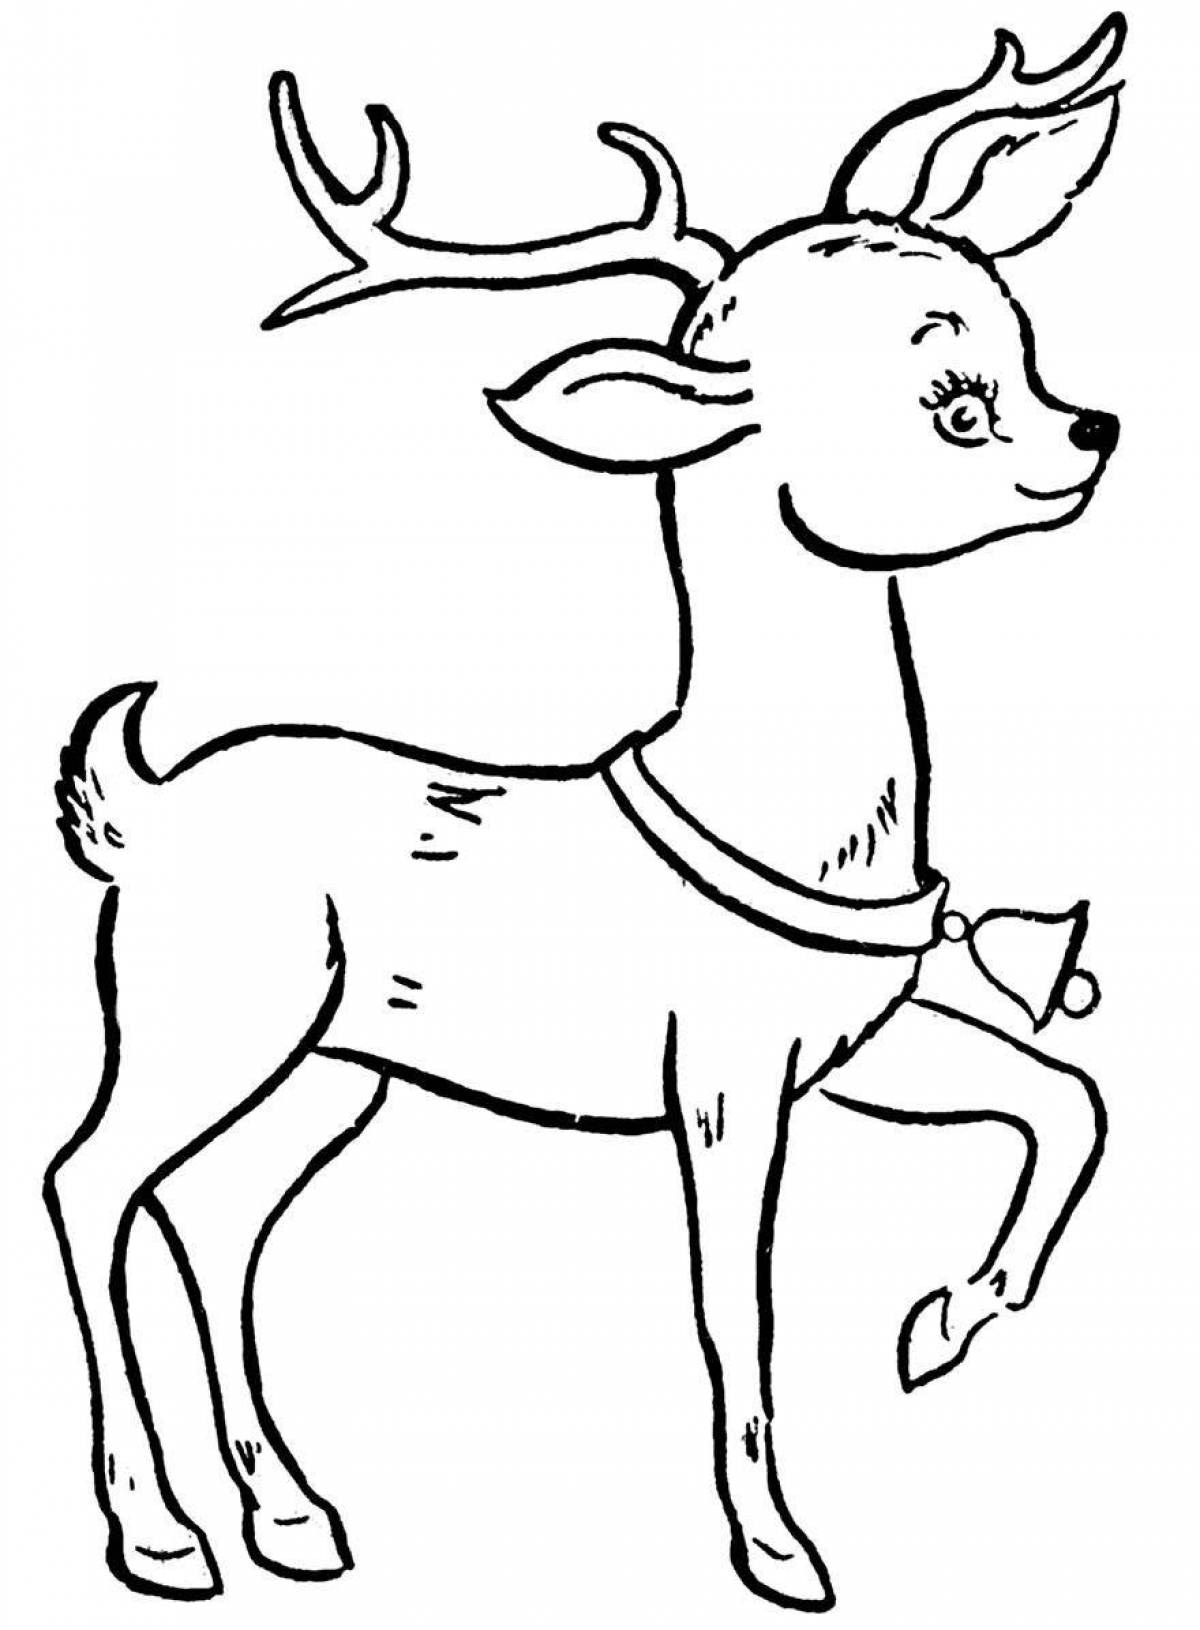 Coloring page shiny badge silver hoof